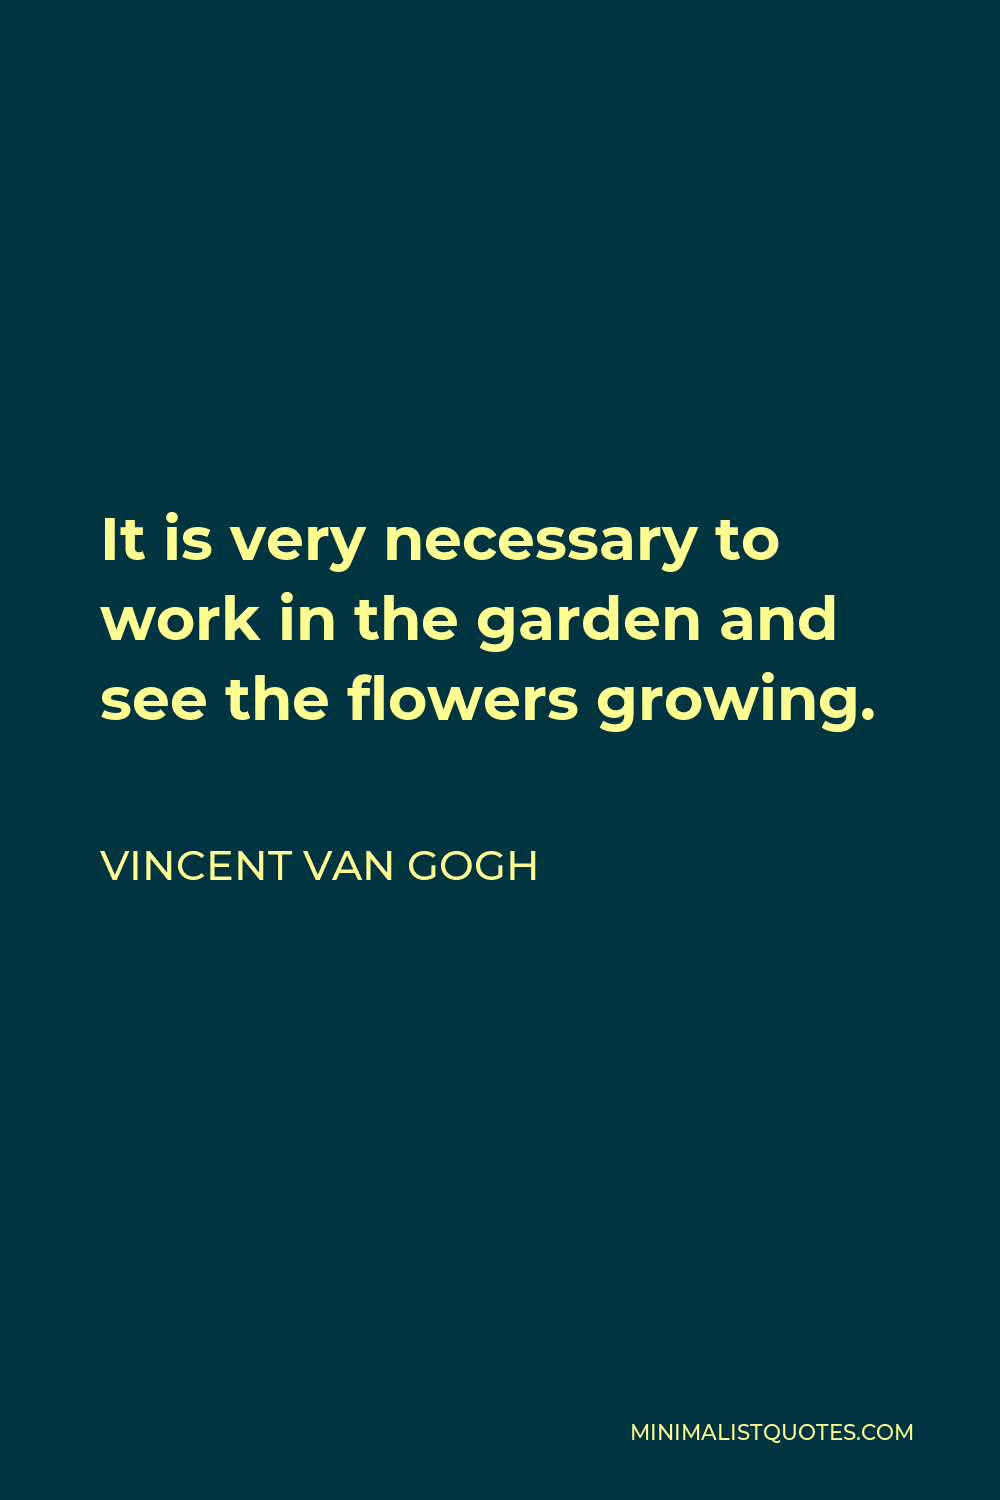 Vincent Van Gogh Quote - It is very necessary to work in the garden and see the flowers growing.